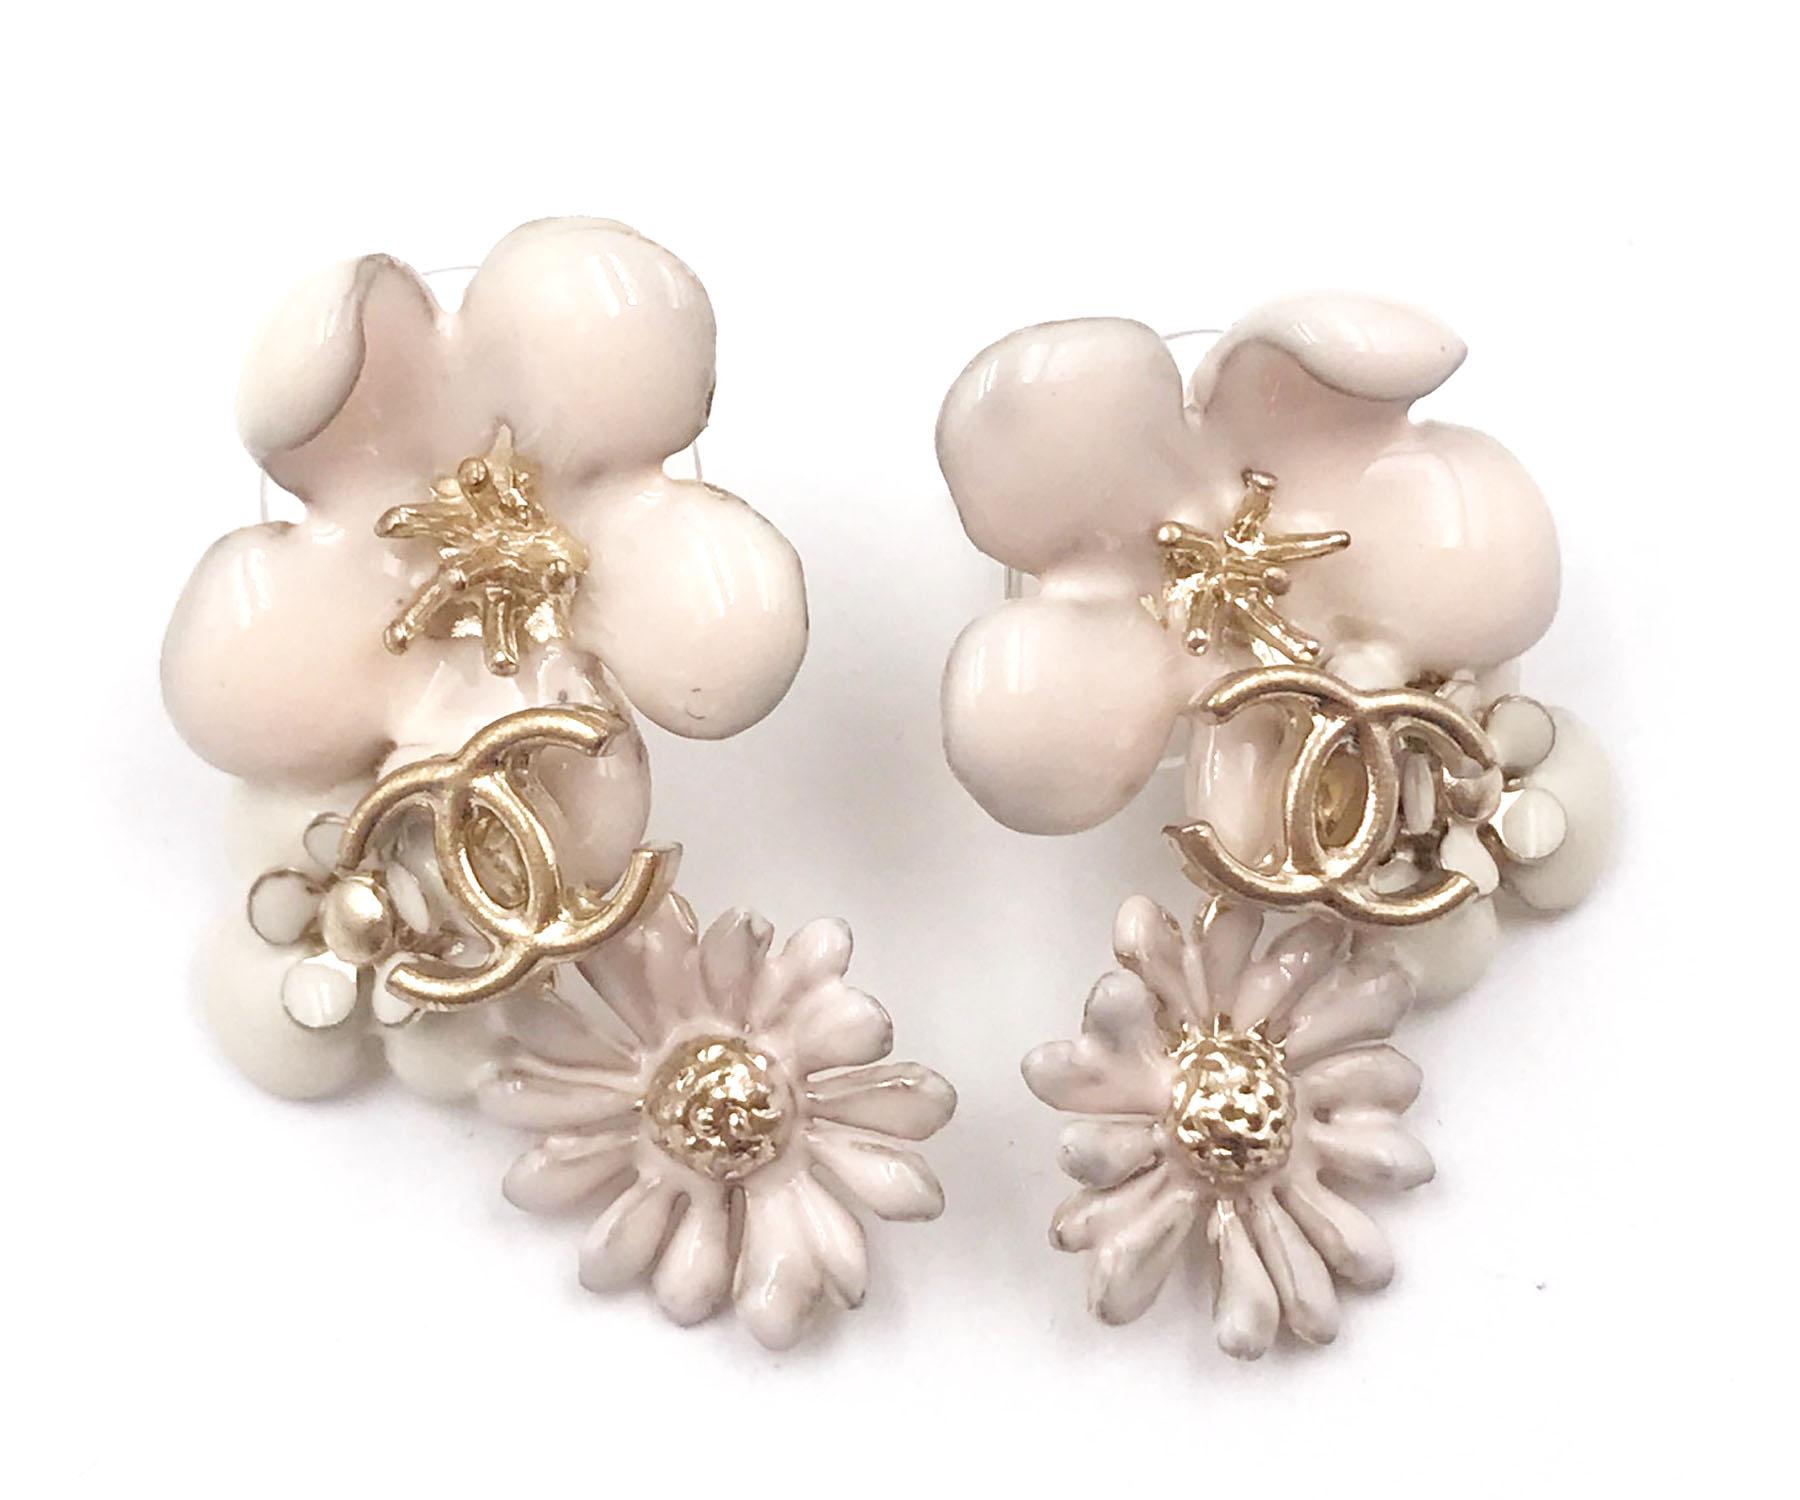 Chanel Classic Gold CC 3 Ivory Flowers Stud Piercing Earrings

*Marked 11
*Made in Italy
*Comes with the original box

-It is approximately 1.1